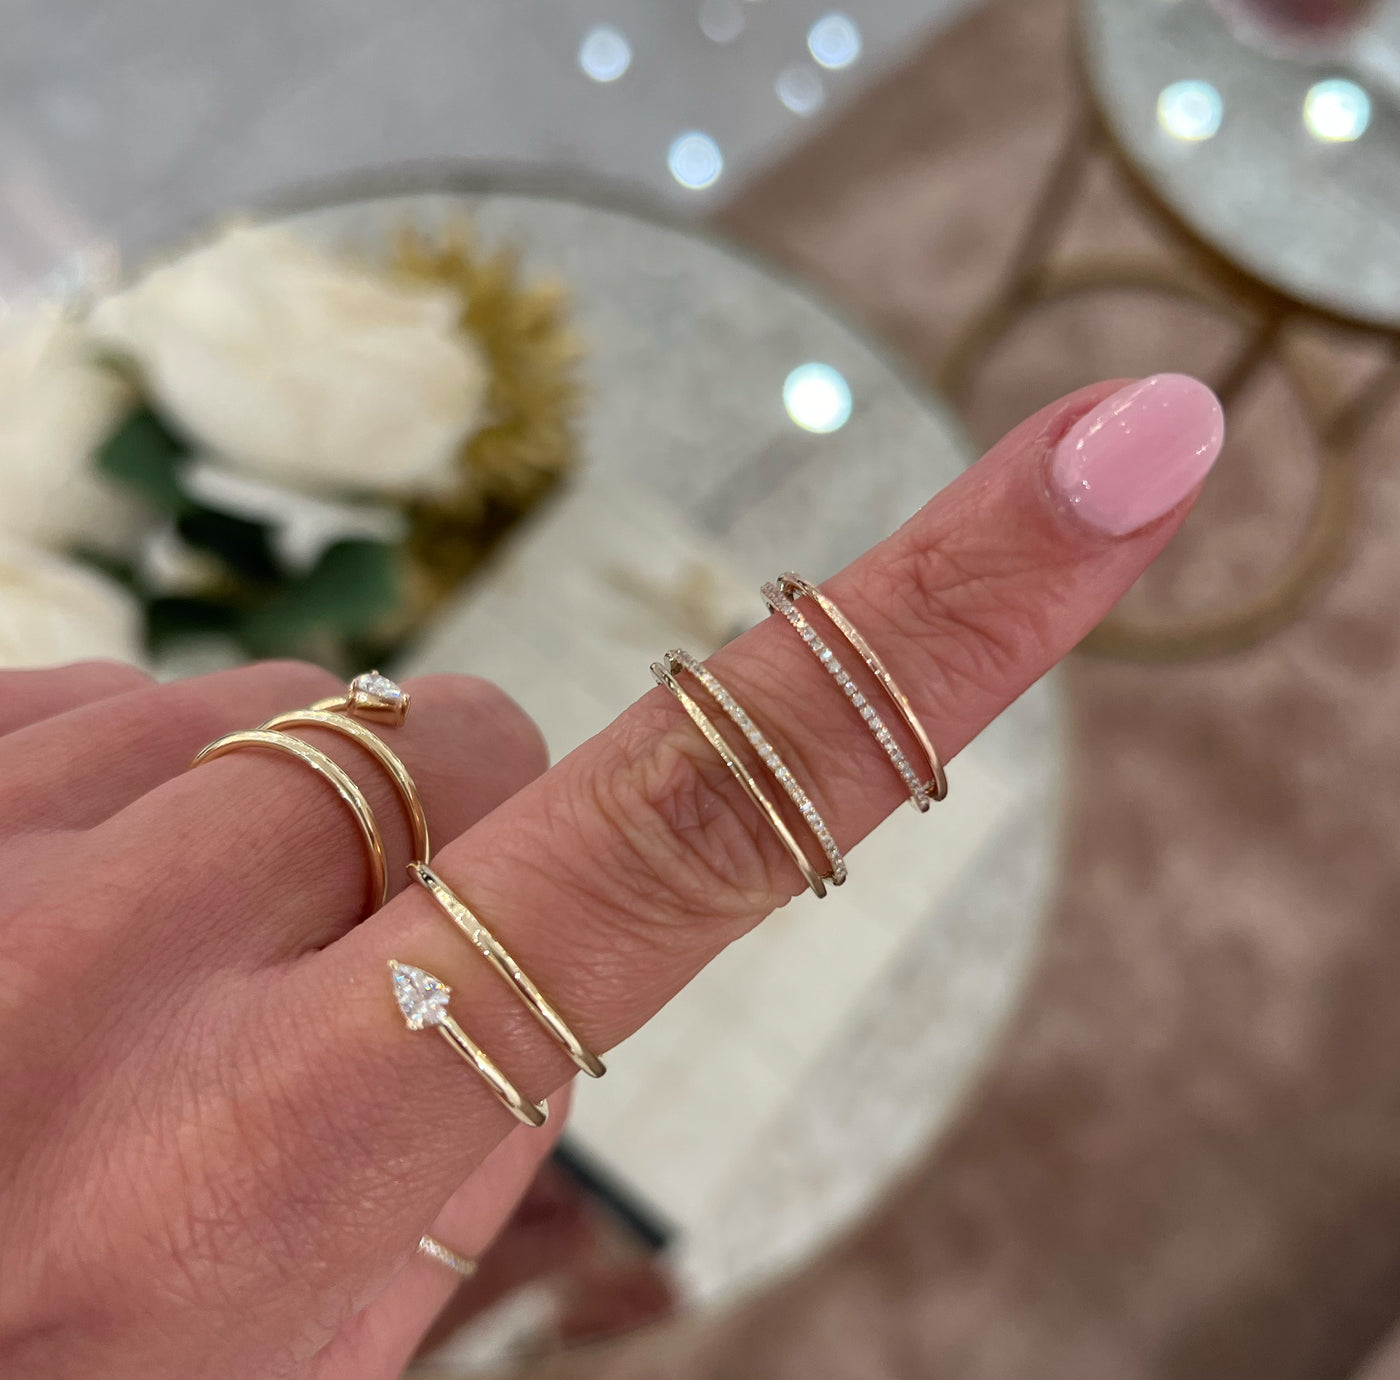 Two Row Gold & Pavé Ring